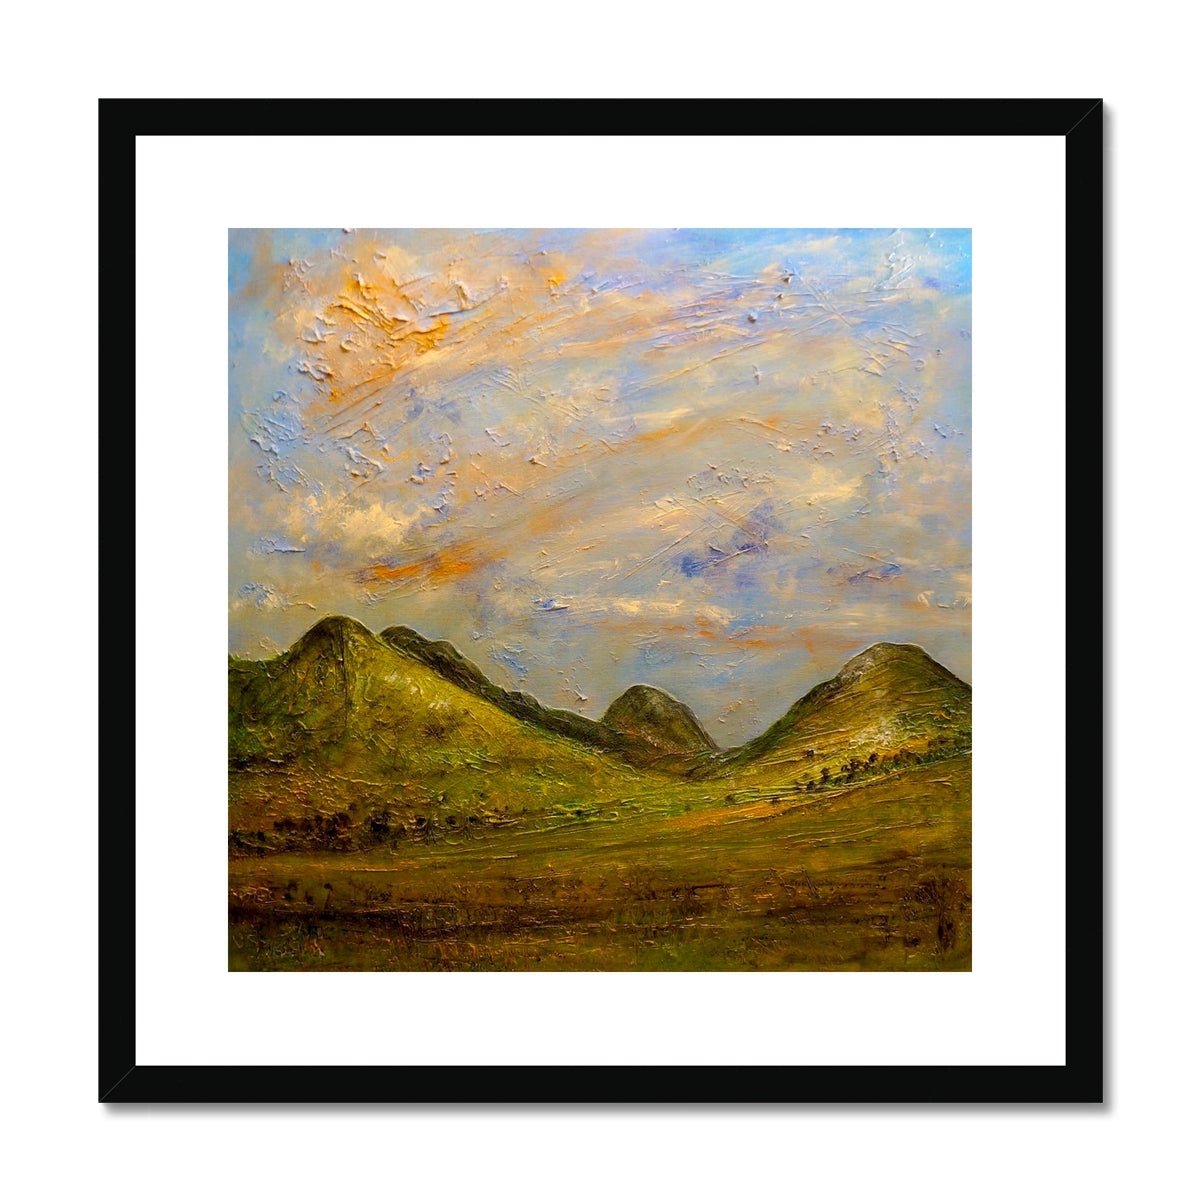 Glencoe Summer Painting | Framed & Mounted Prints From Scotland-Framed & Mounted Prints-Glencoe Art Gallery-20"x20"-Black Frame-Paintings, Prints, Homeware, Art Gifts From Scotland By Scottish Artist Kevin Hunter